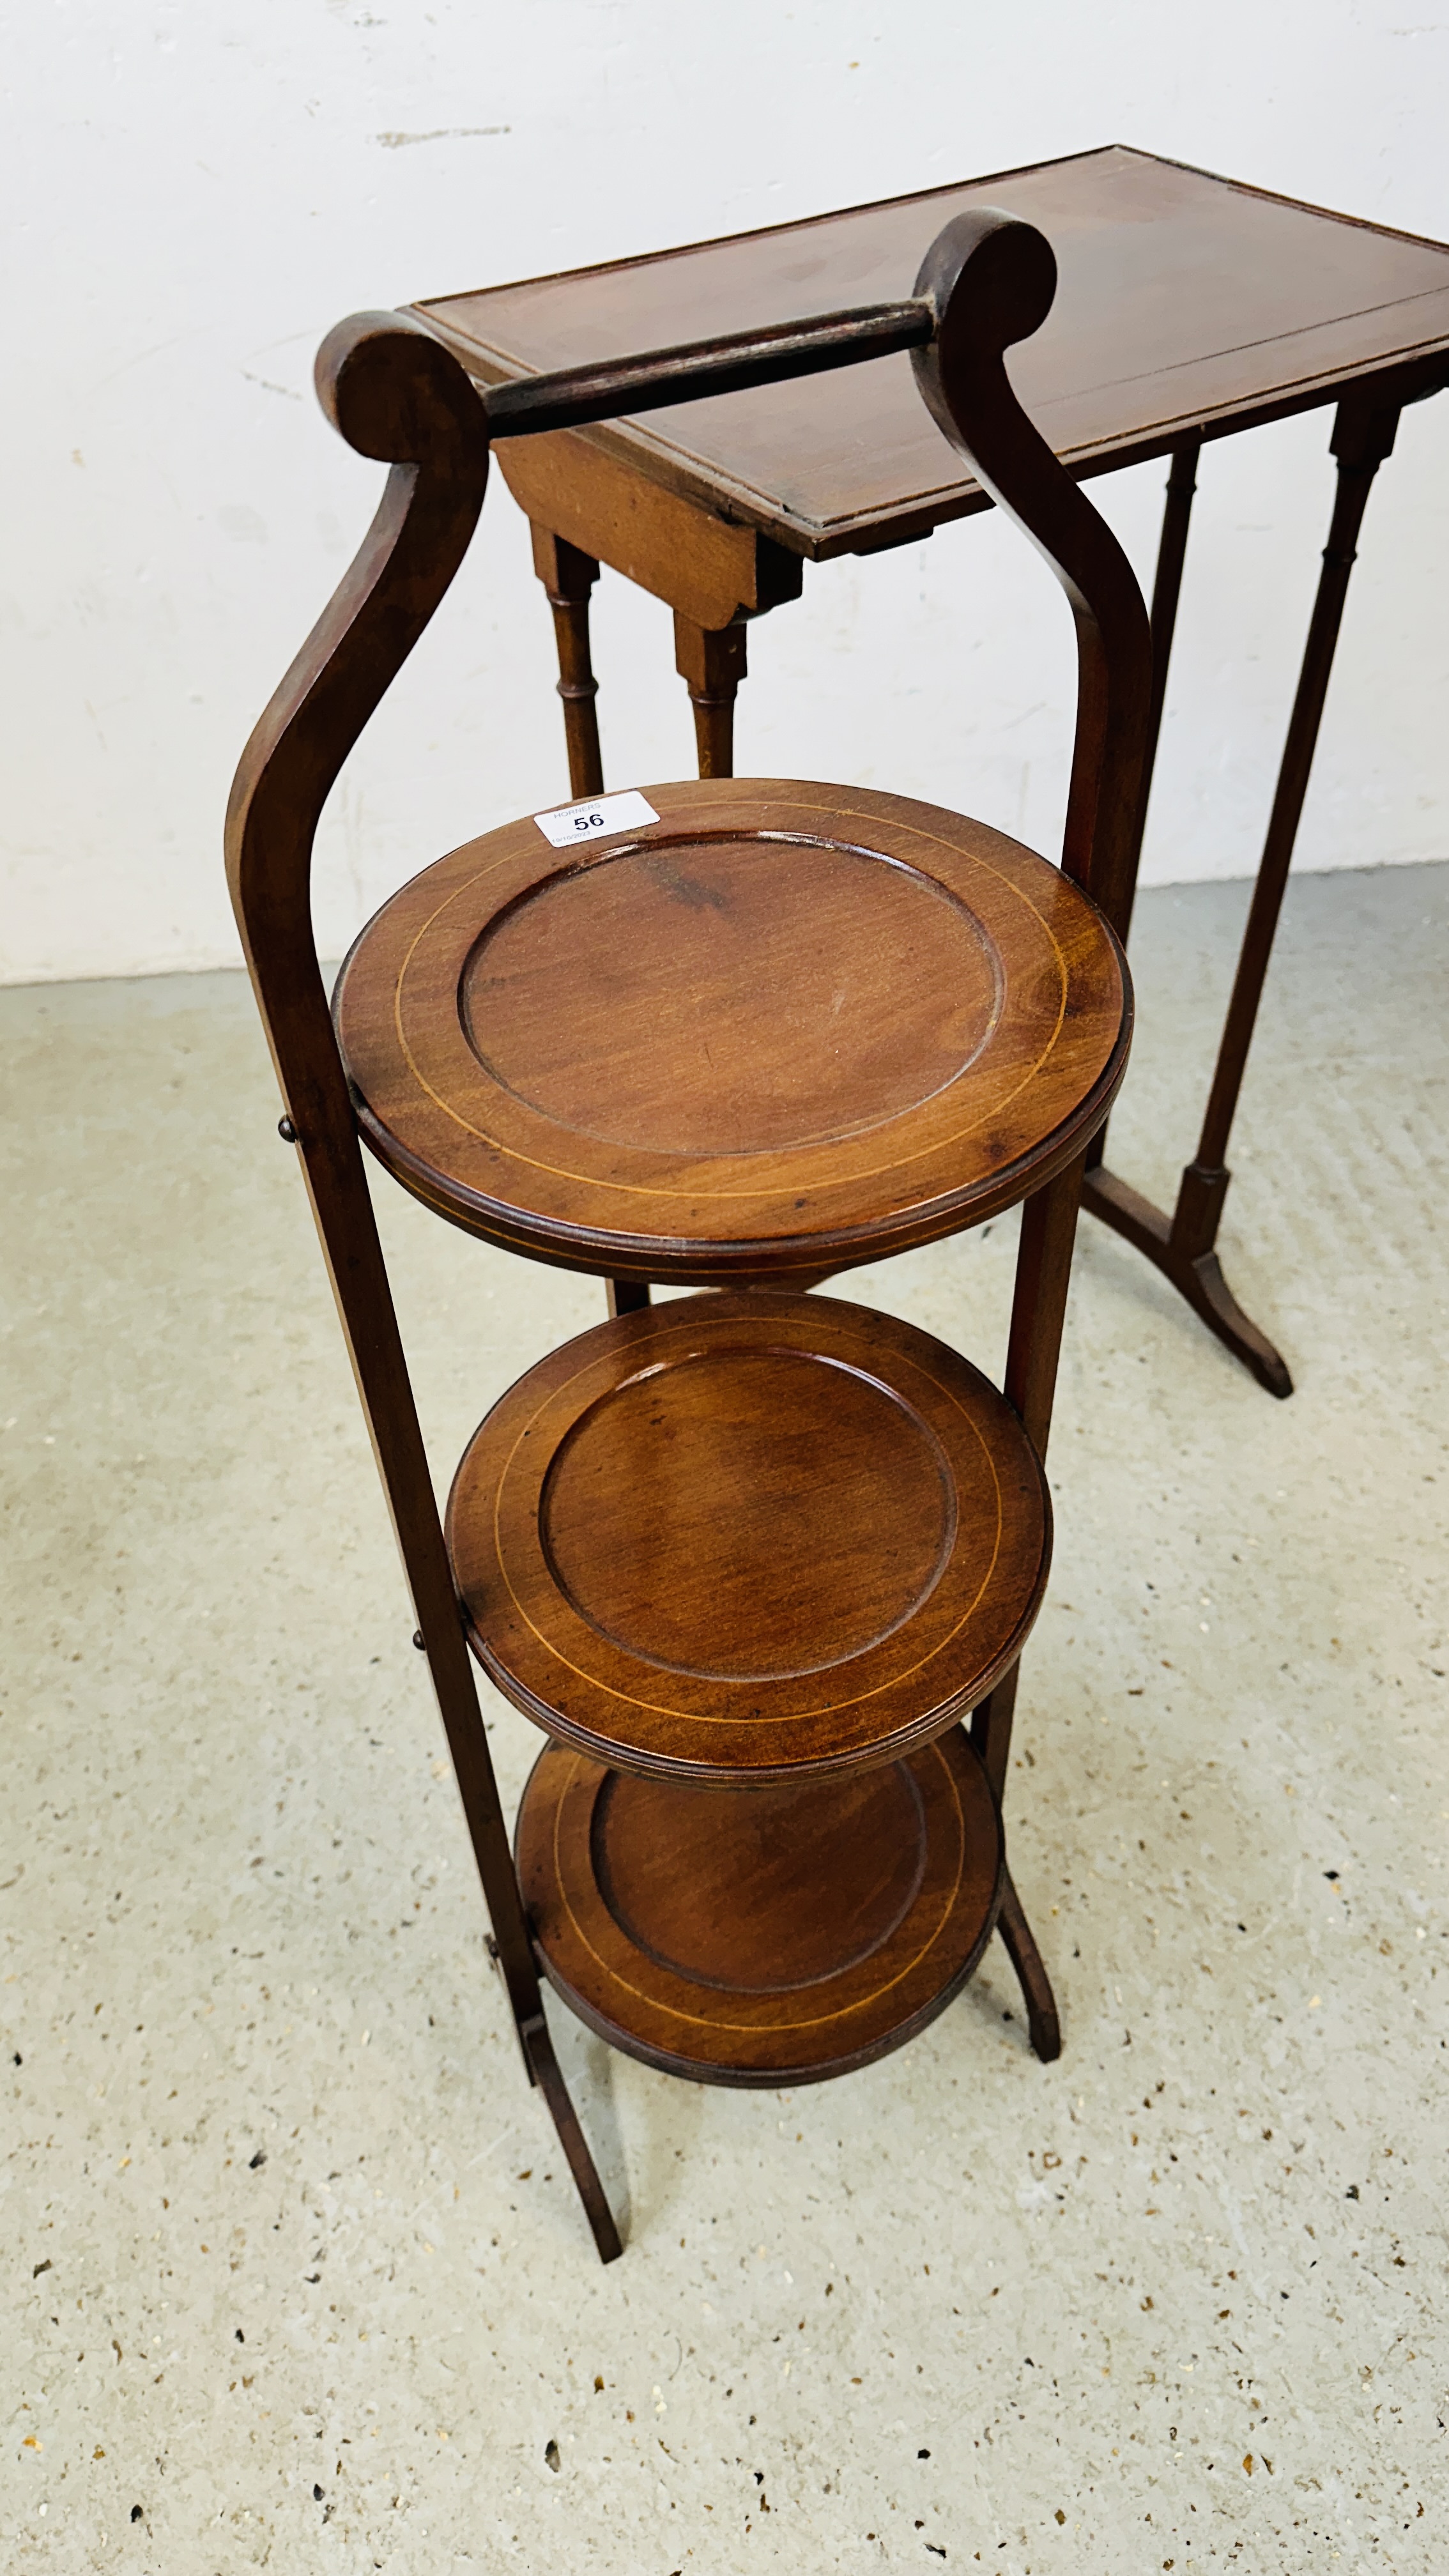 A FOLDING CAKE STAND ALONG WITH MAHOGNY OCCASIONAL TABLE, ONE OF A QUATTETO SET. - Image 2 of 10